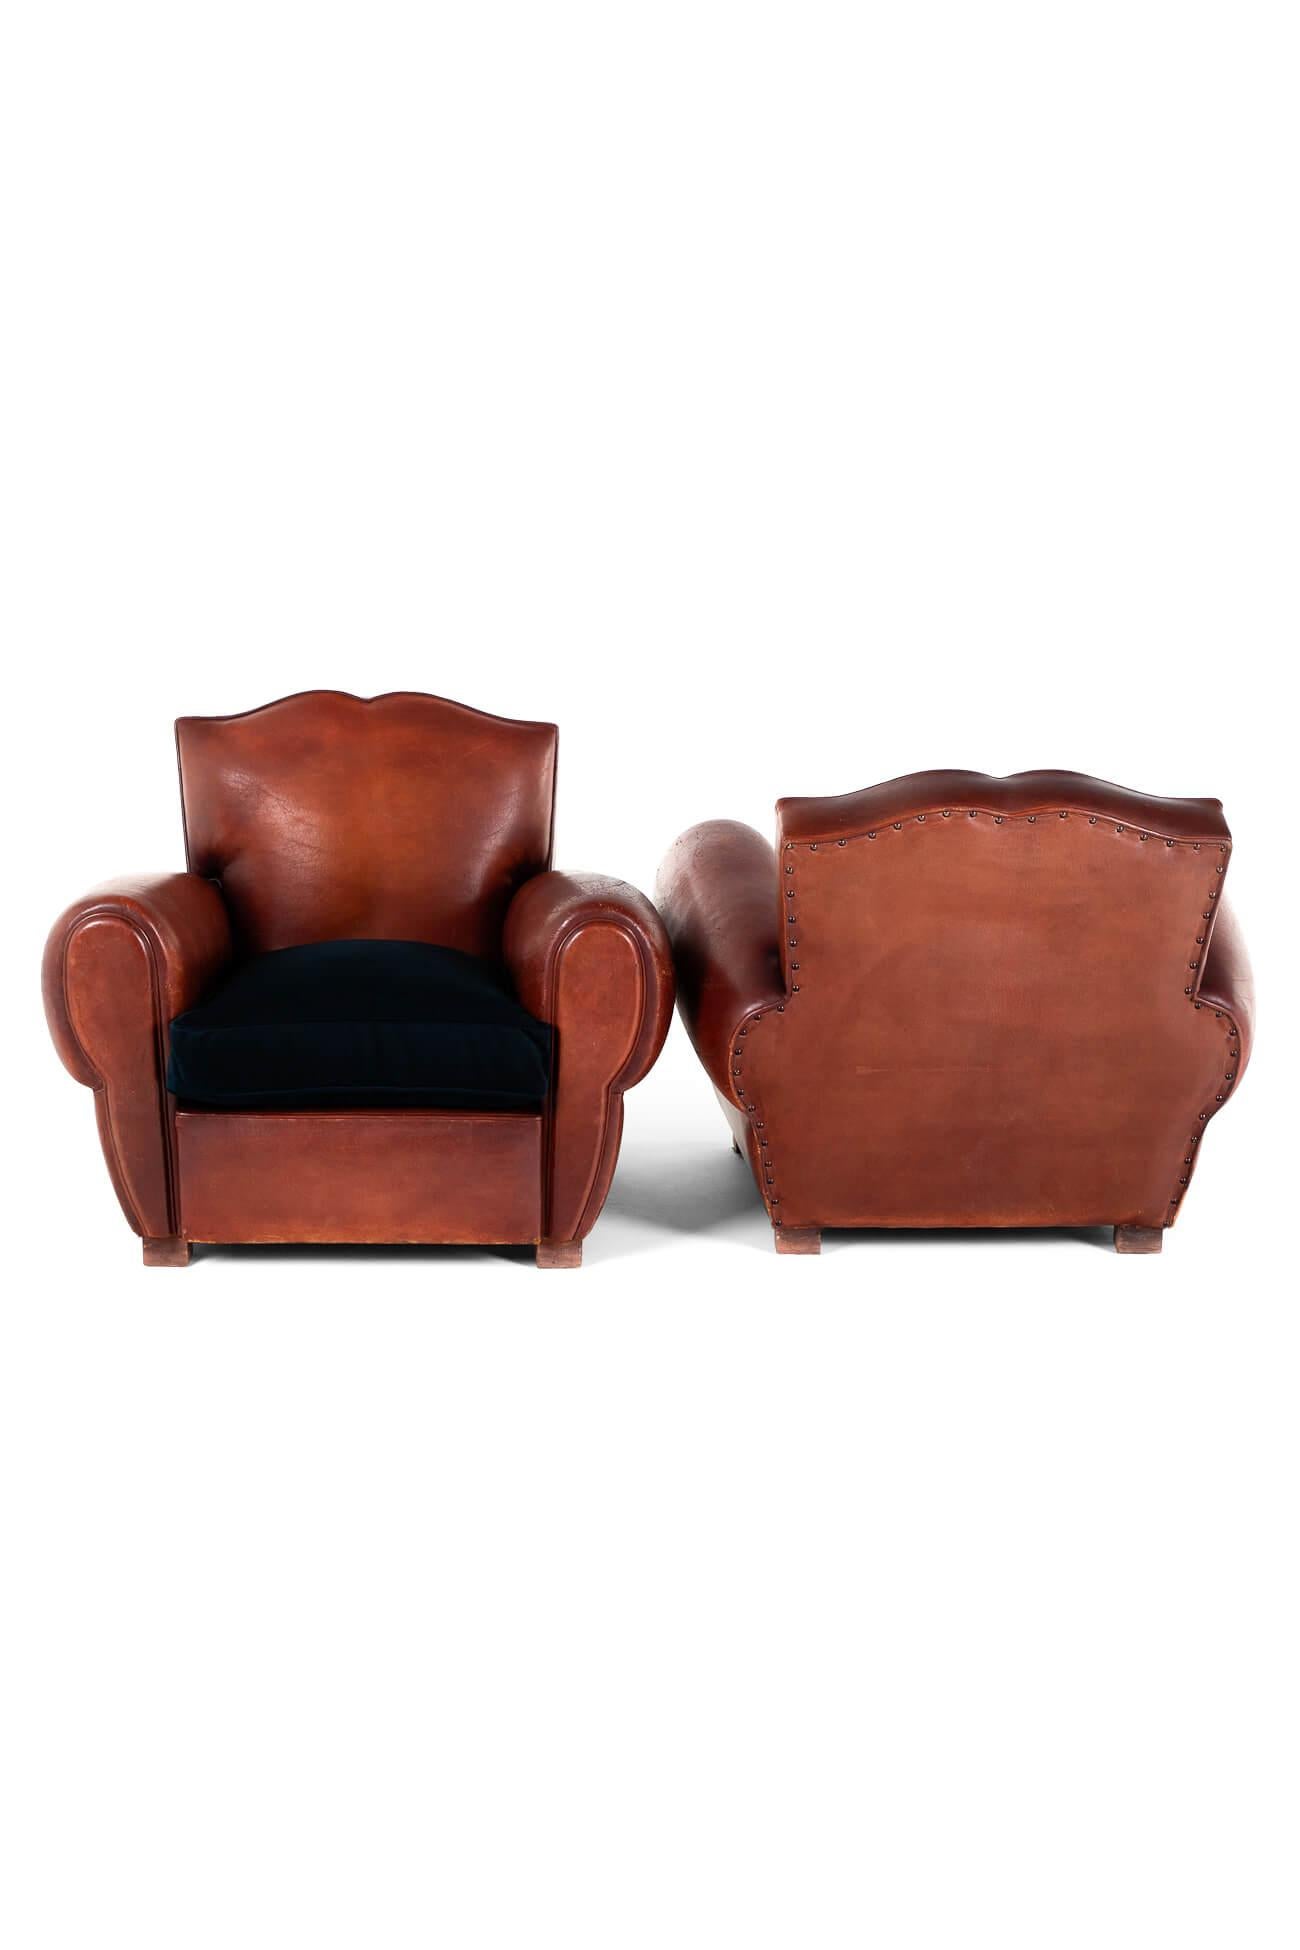 Art Deco Pair of Moustache Back Club Chairs For Sale